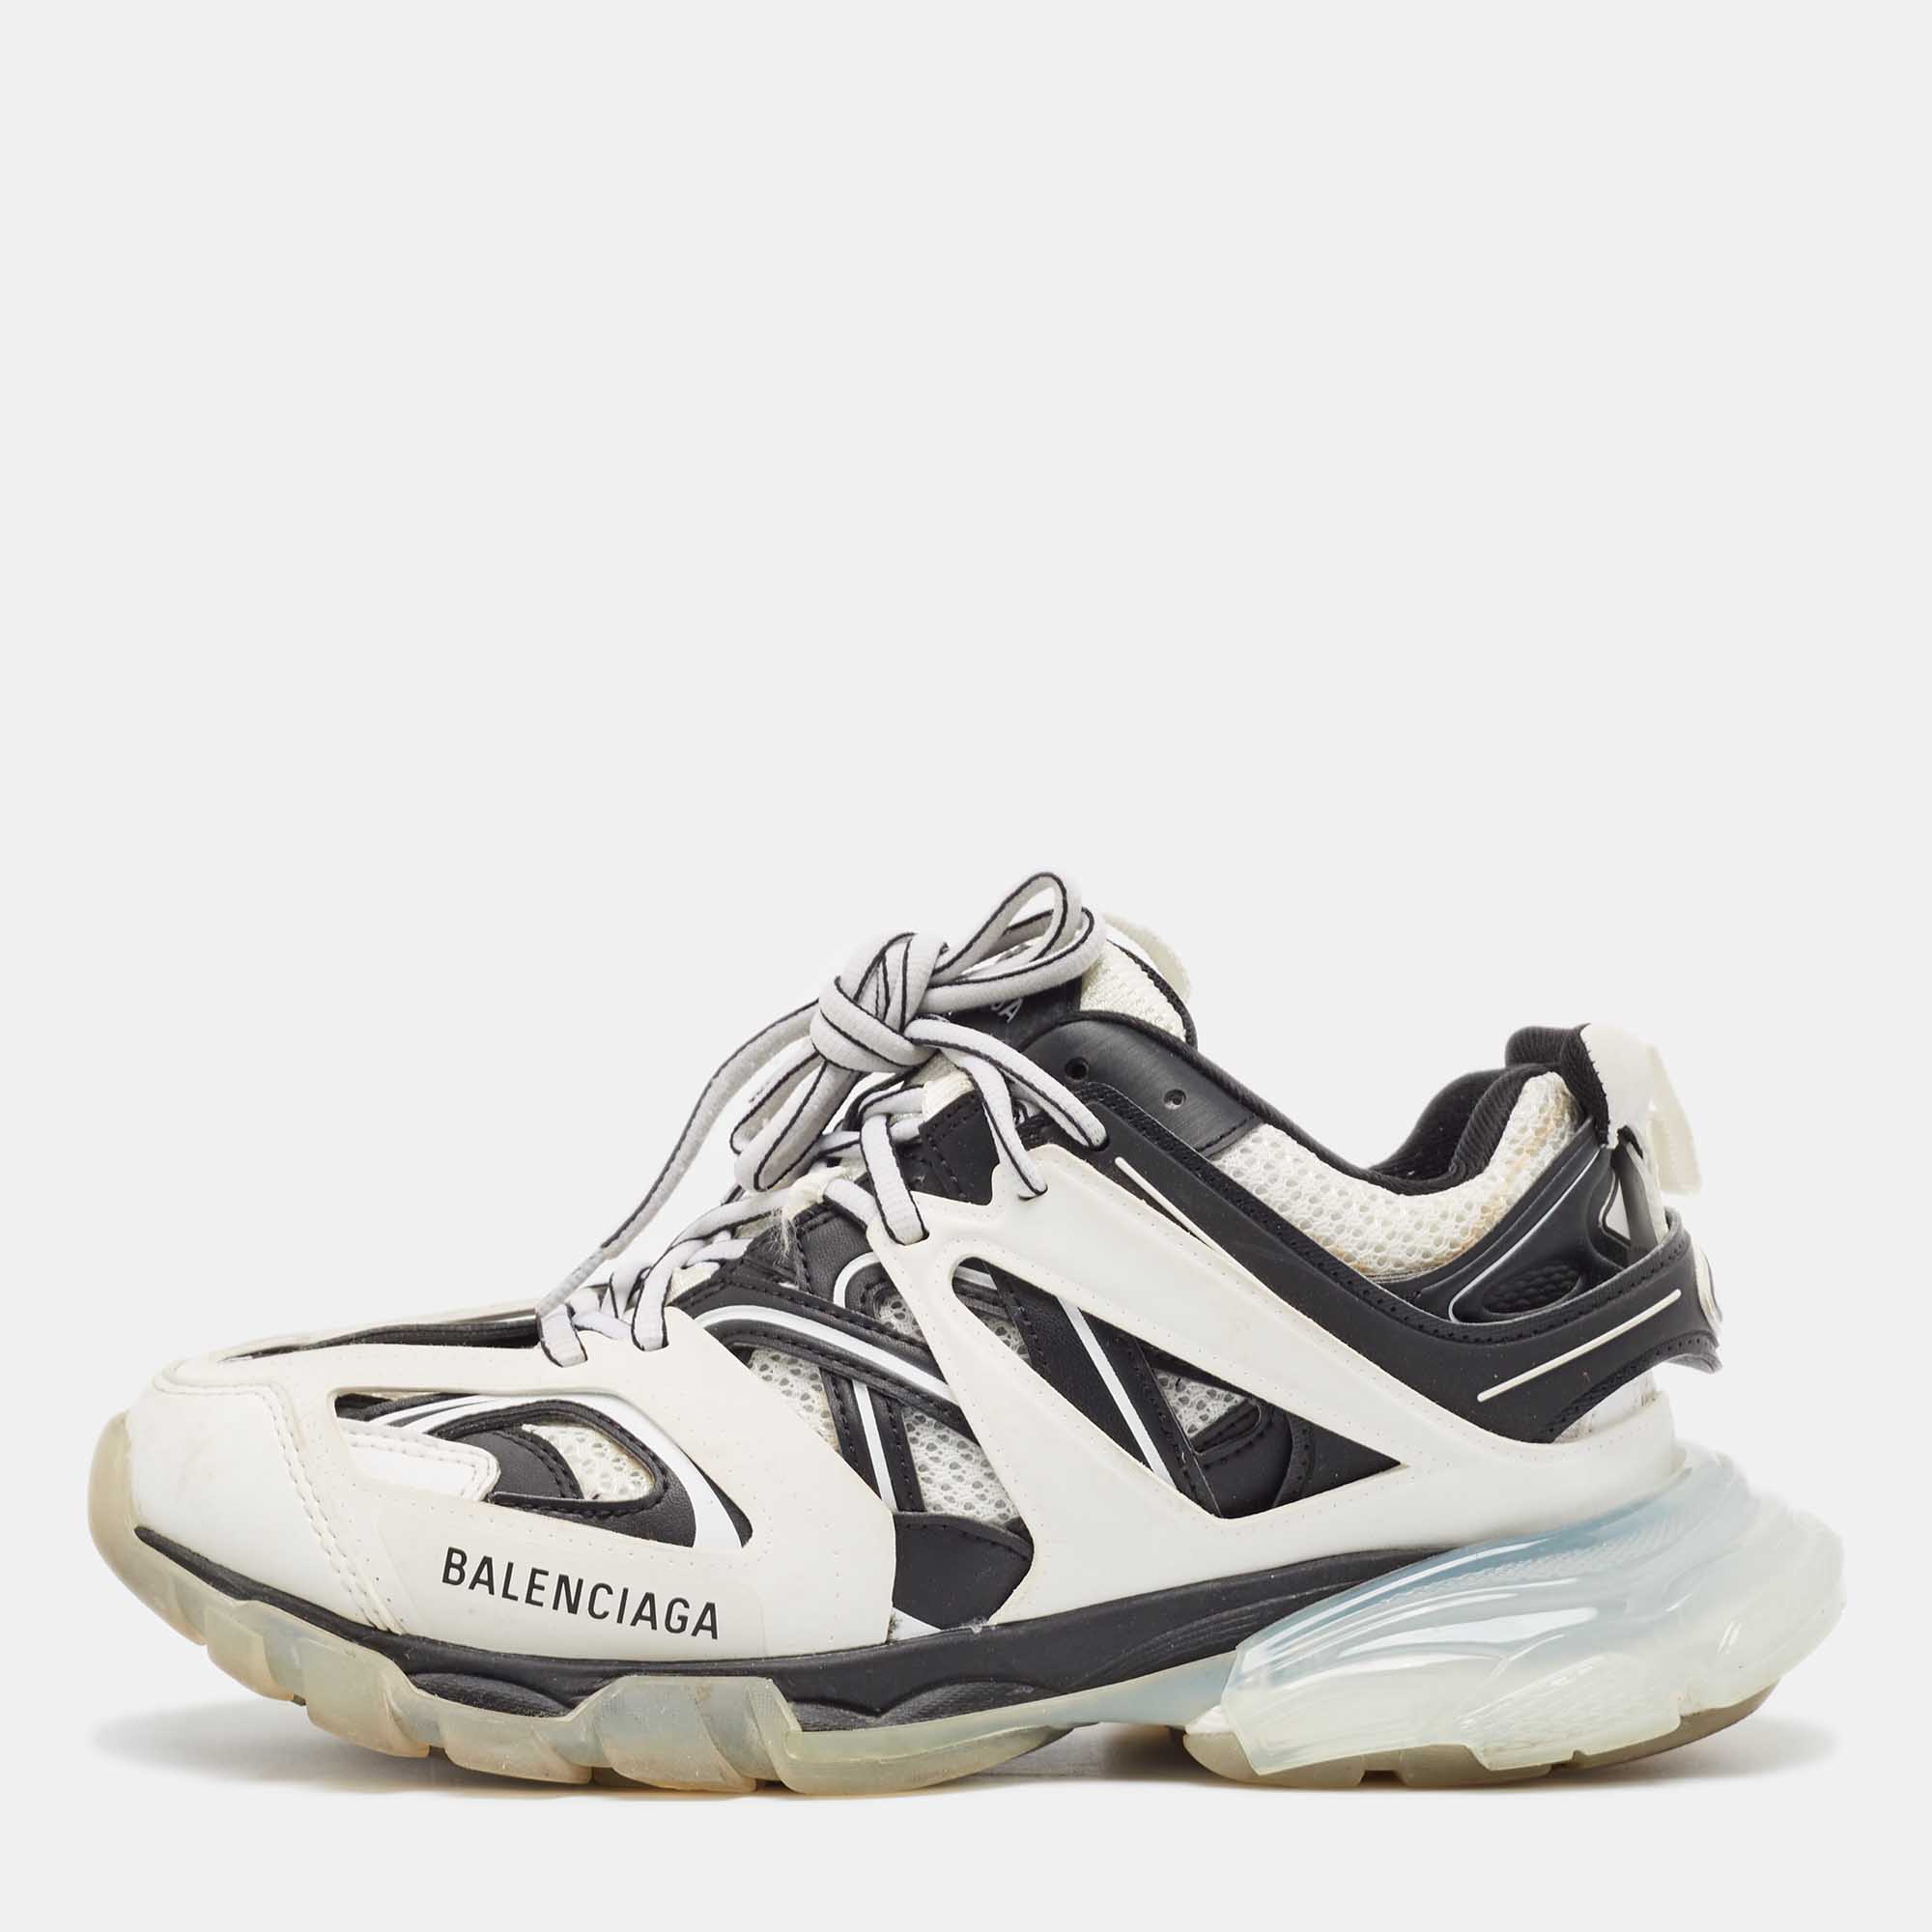 

Balenciaga White/Black Leather And Mesh Track Sneakers Size